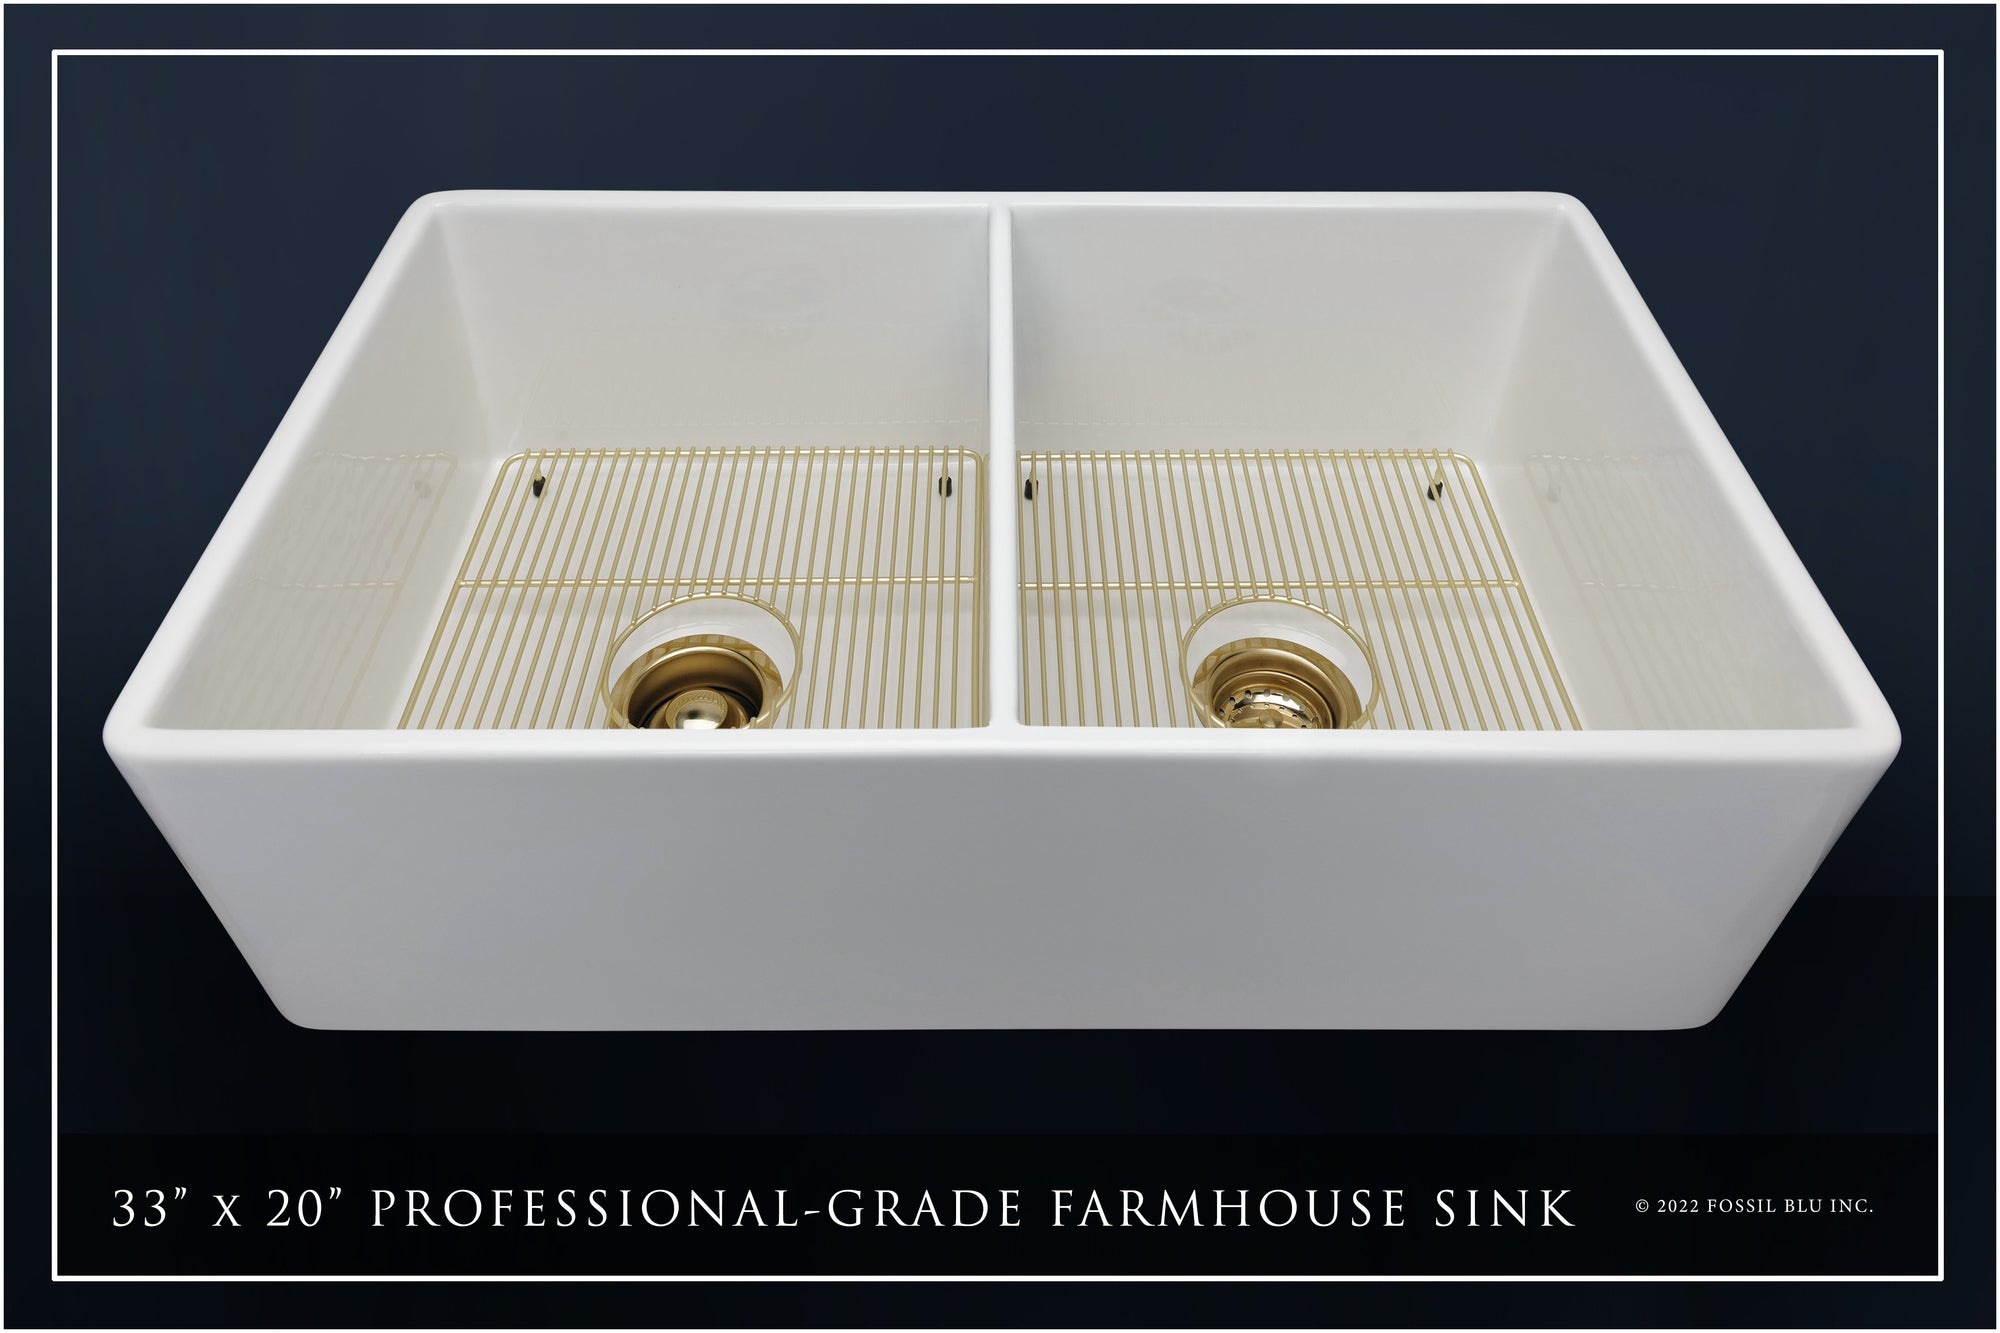 FSW1003BB LUXURY 33-INCH SOLID FIRECLAY FARMHOUSE SINK IN WHITE, MATTE GOLD ACCS, FLAT FRONT